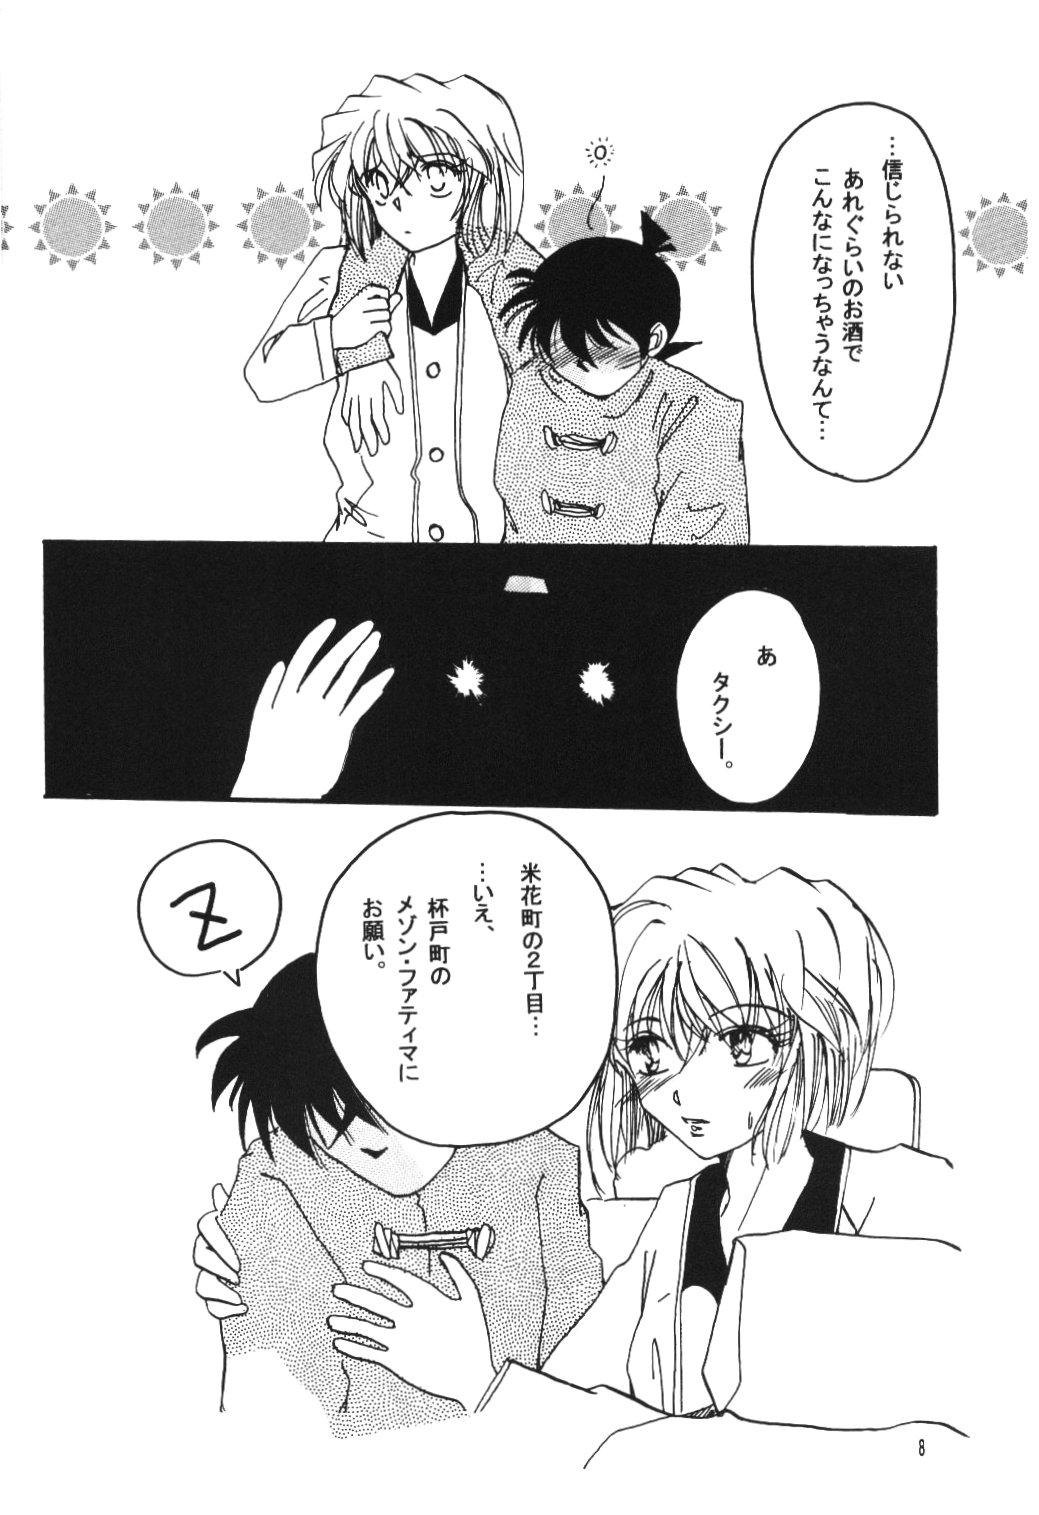 She Over Drive - Detective conan Salope - Page 7